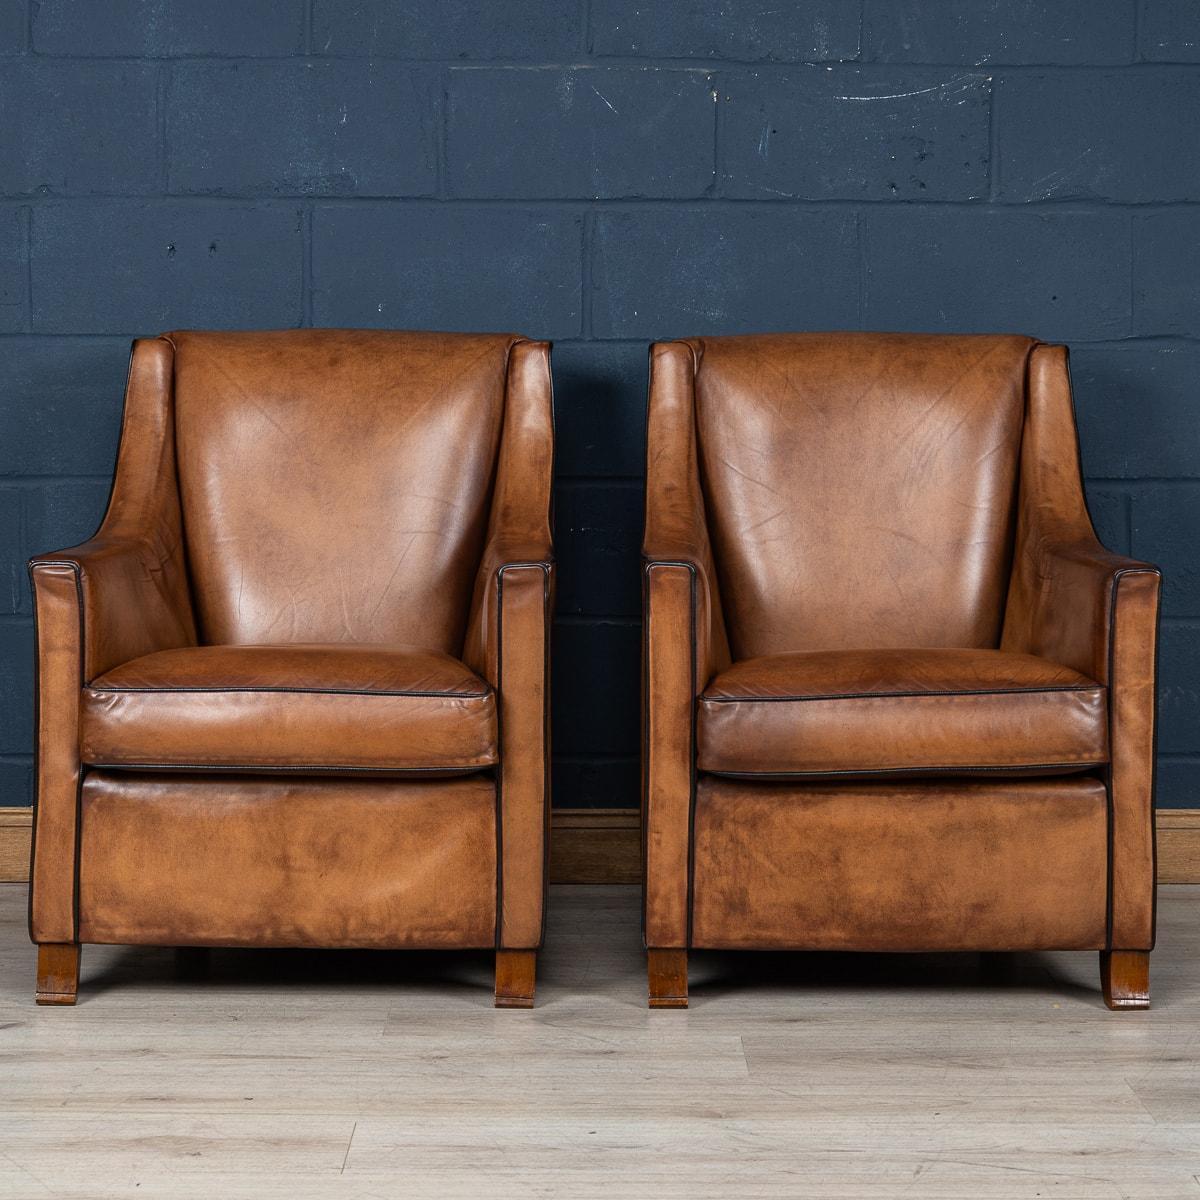 Showing superb patina and colour, this wonderful pair of club chairs were hand upholstered sheepskin leather in Holland by the finest craftsmen in the latter part of the 20th century.

The design and craftsmanship of sheep leather furniture was